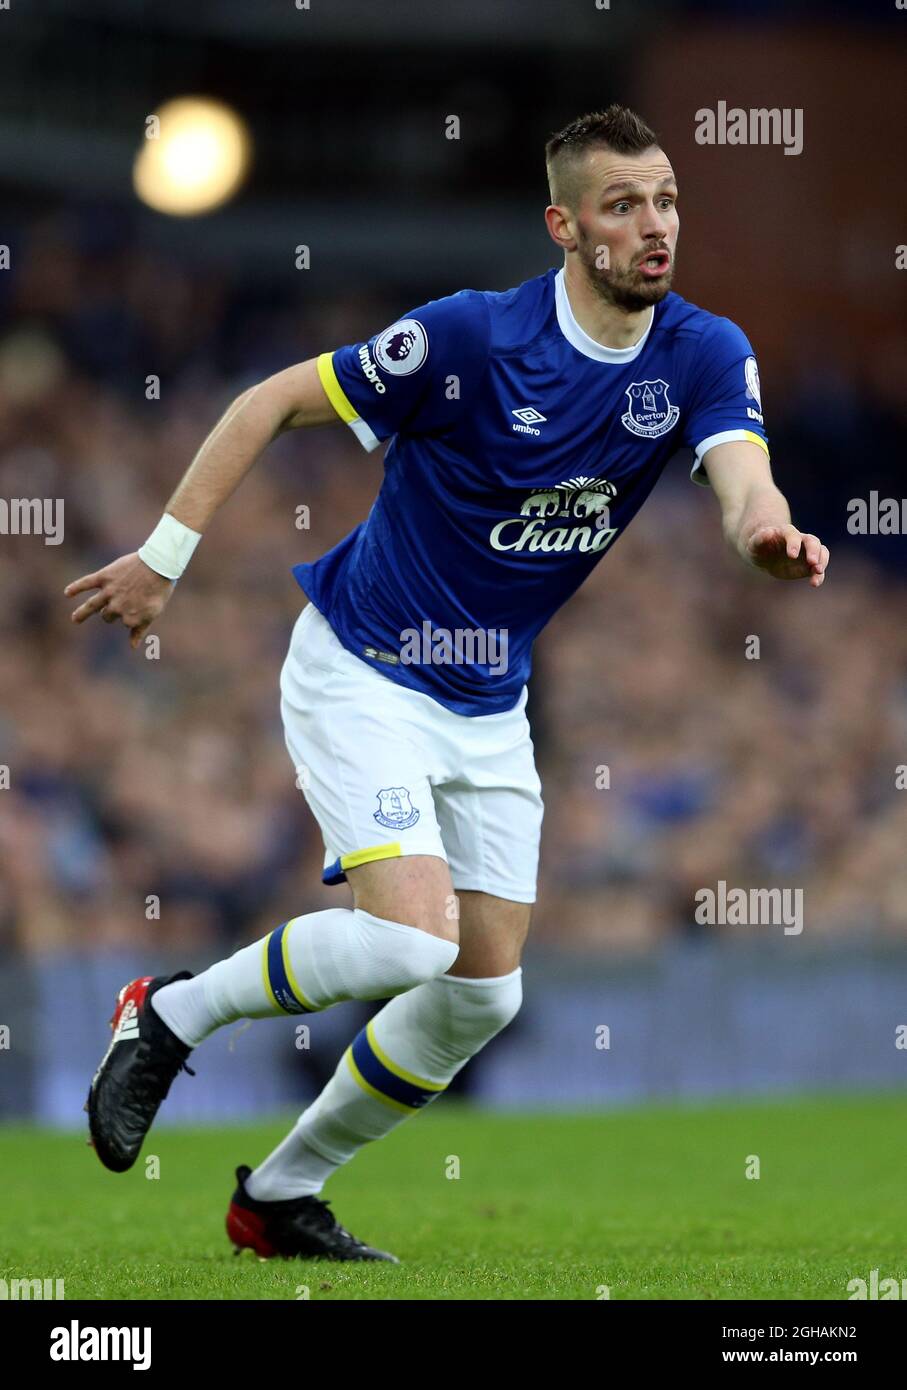 Morgan Schneiderin of Everton during the English Premier League match at Goodison Park Stadium, Liverpool Picture date: January 15th, 2017. Pic Simon Bellis/Sportimage via PA Images Stock Photo